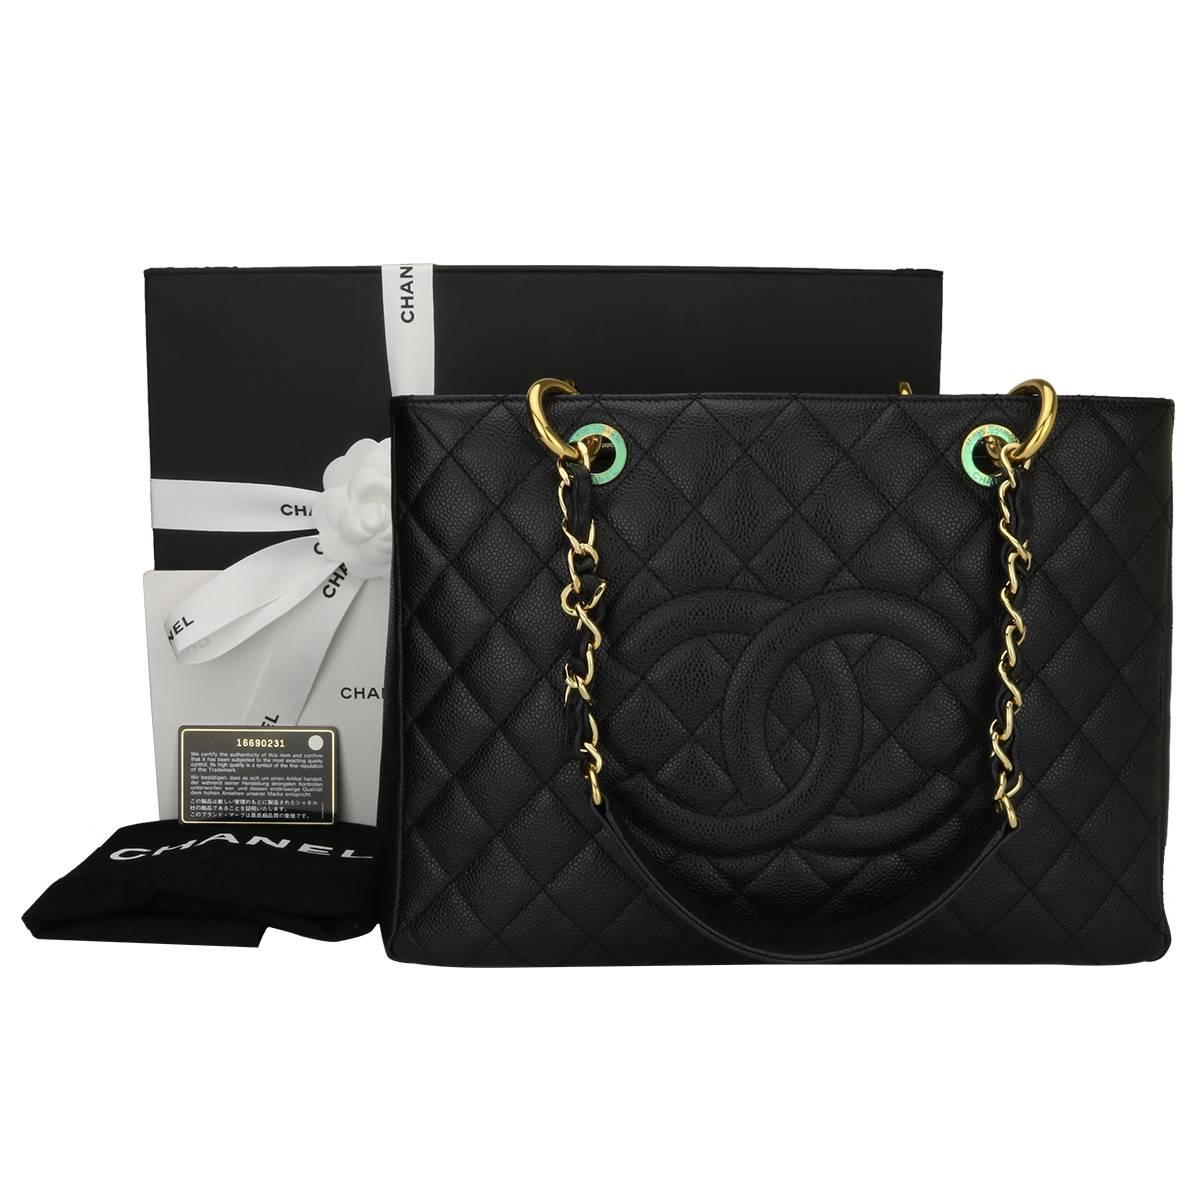 Authentica CHANEL Grand Shopping Tote (GST) Black Caviar with Gold Hardware 2012.

This stunning bag is in a mint condition, the bag still holds its original shape, and the hardware is still very shiny.

Exterior Condition: Mint condition, corners